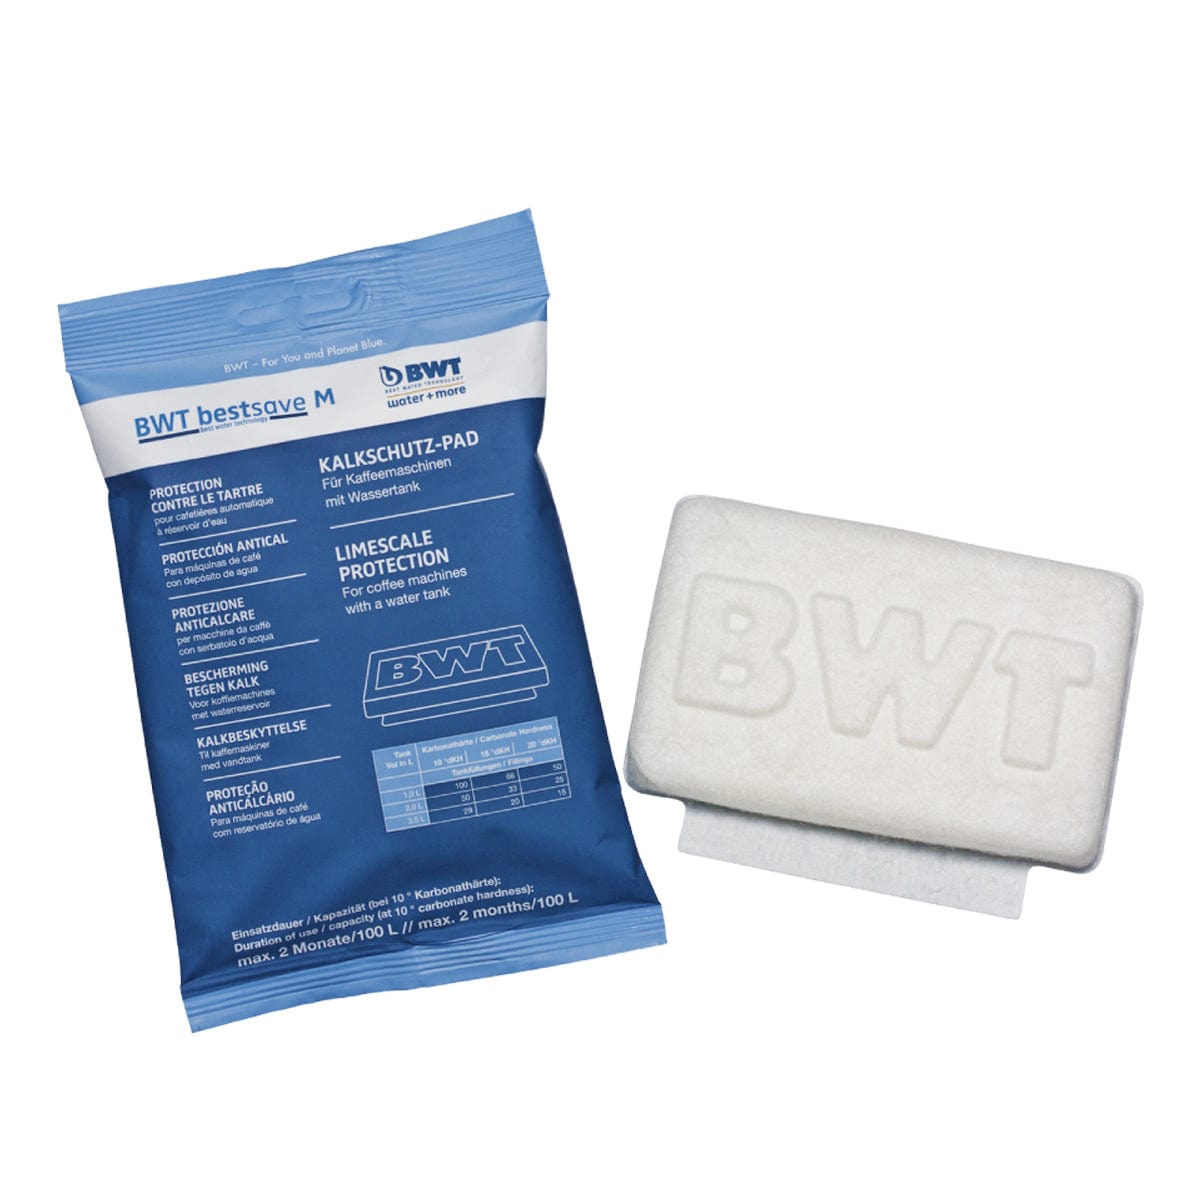 BWT Bestsave Filter Pad